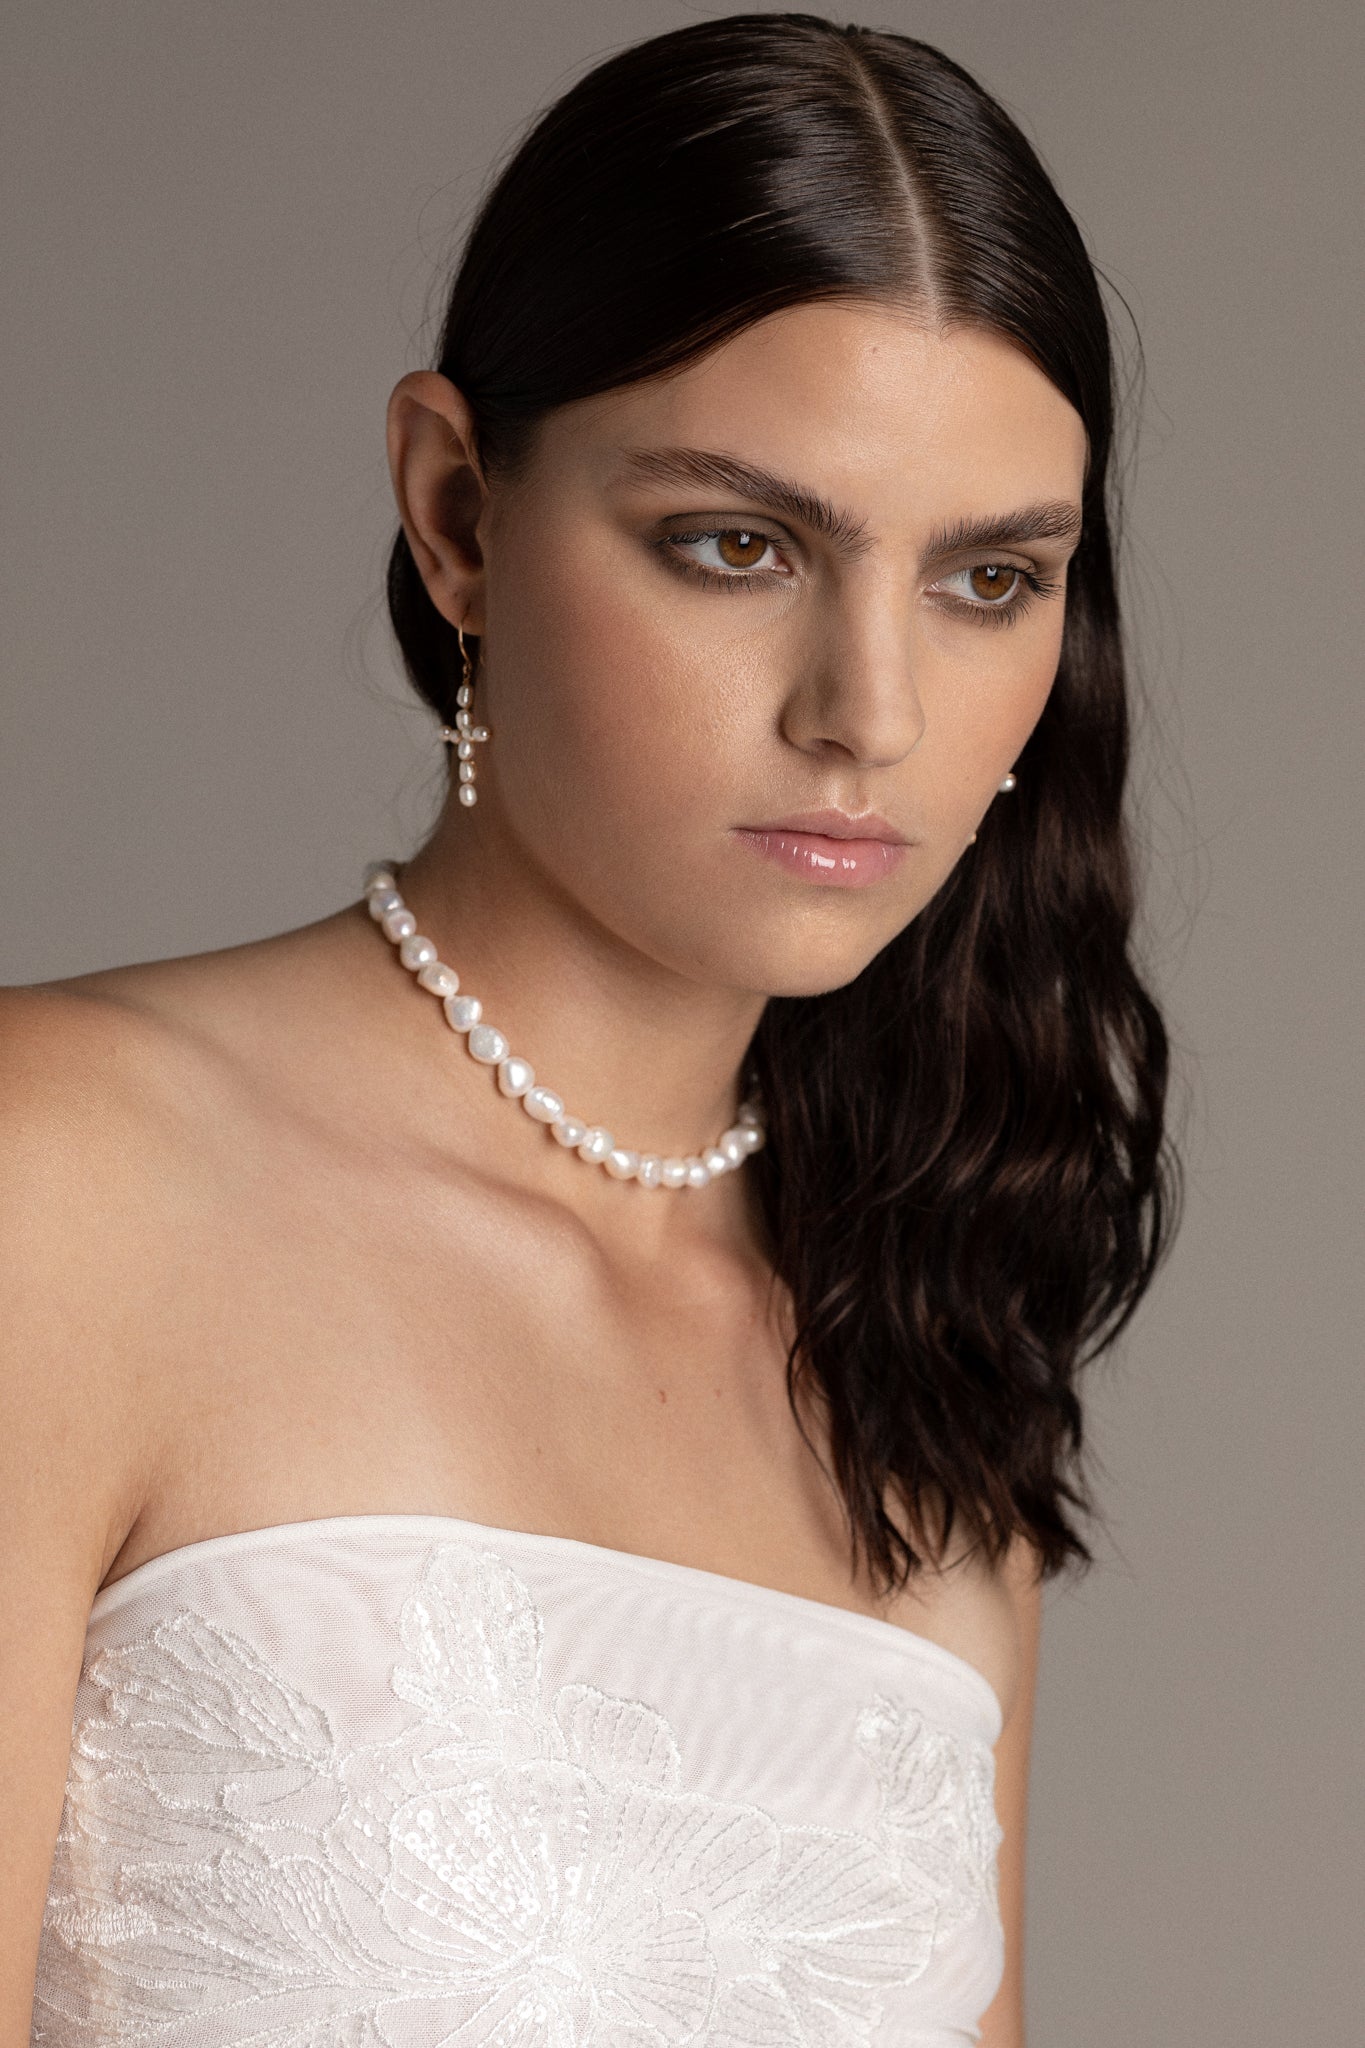 This choker showcases large, irregular freshwater pearls strung on a wire, creating a distinctive and captivating look.